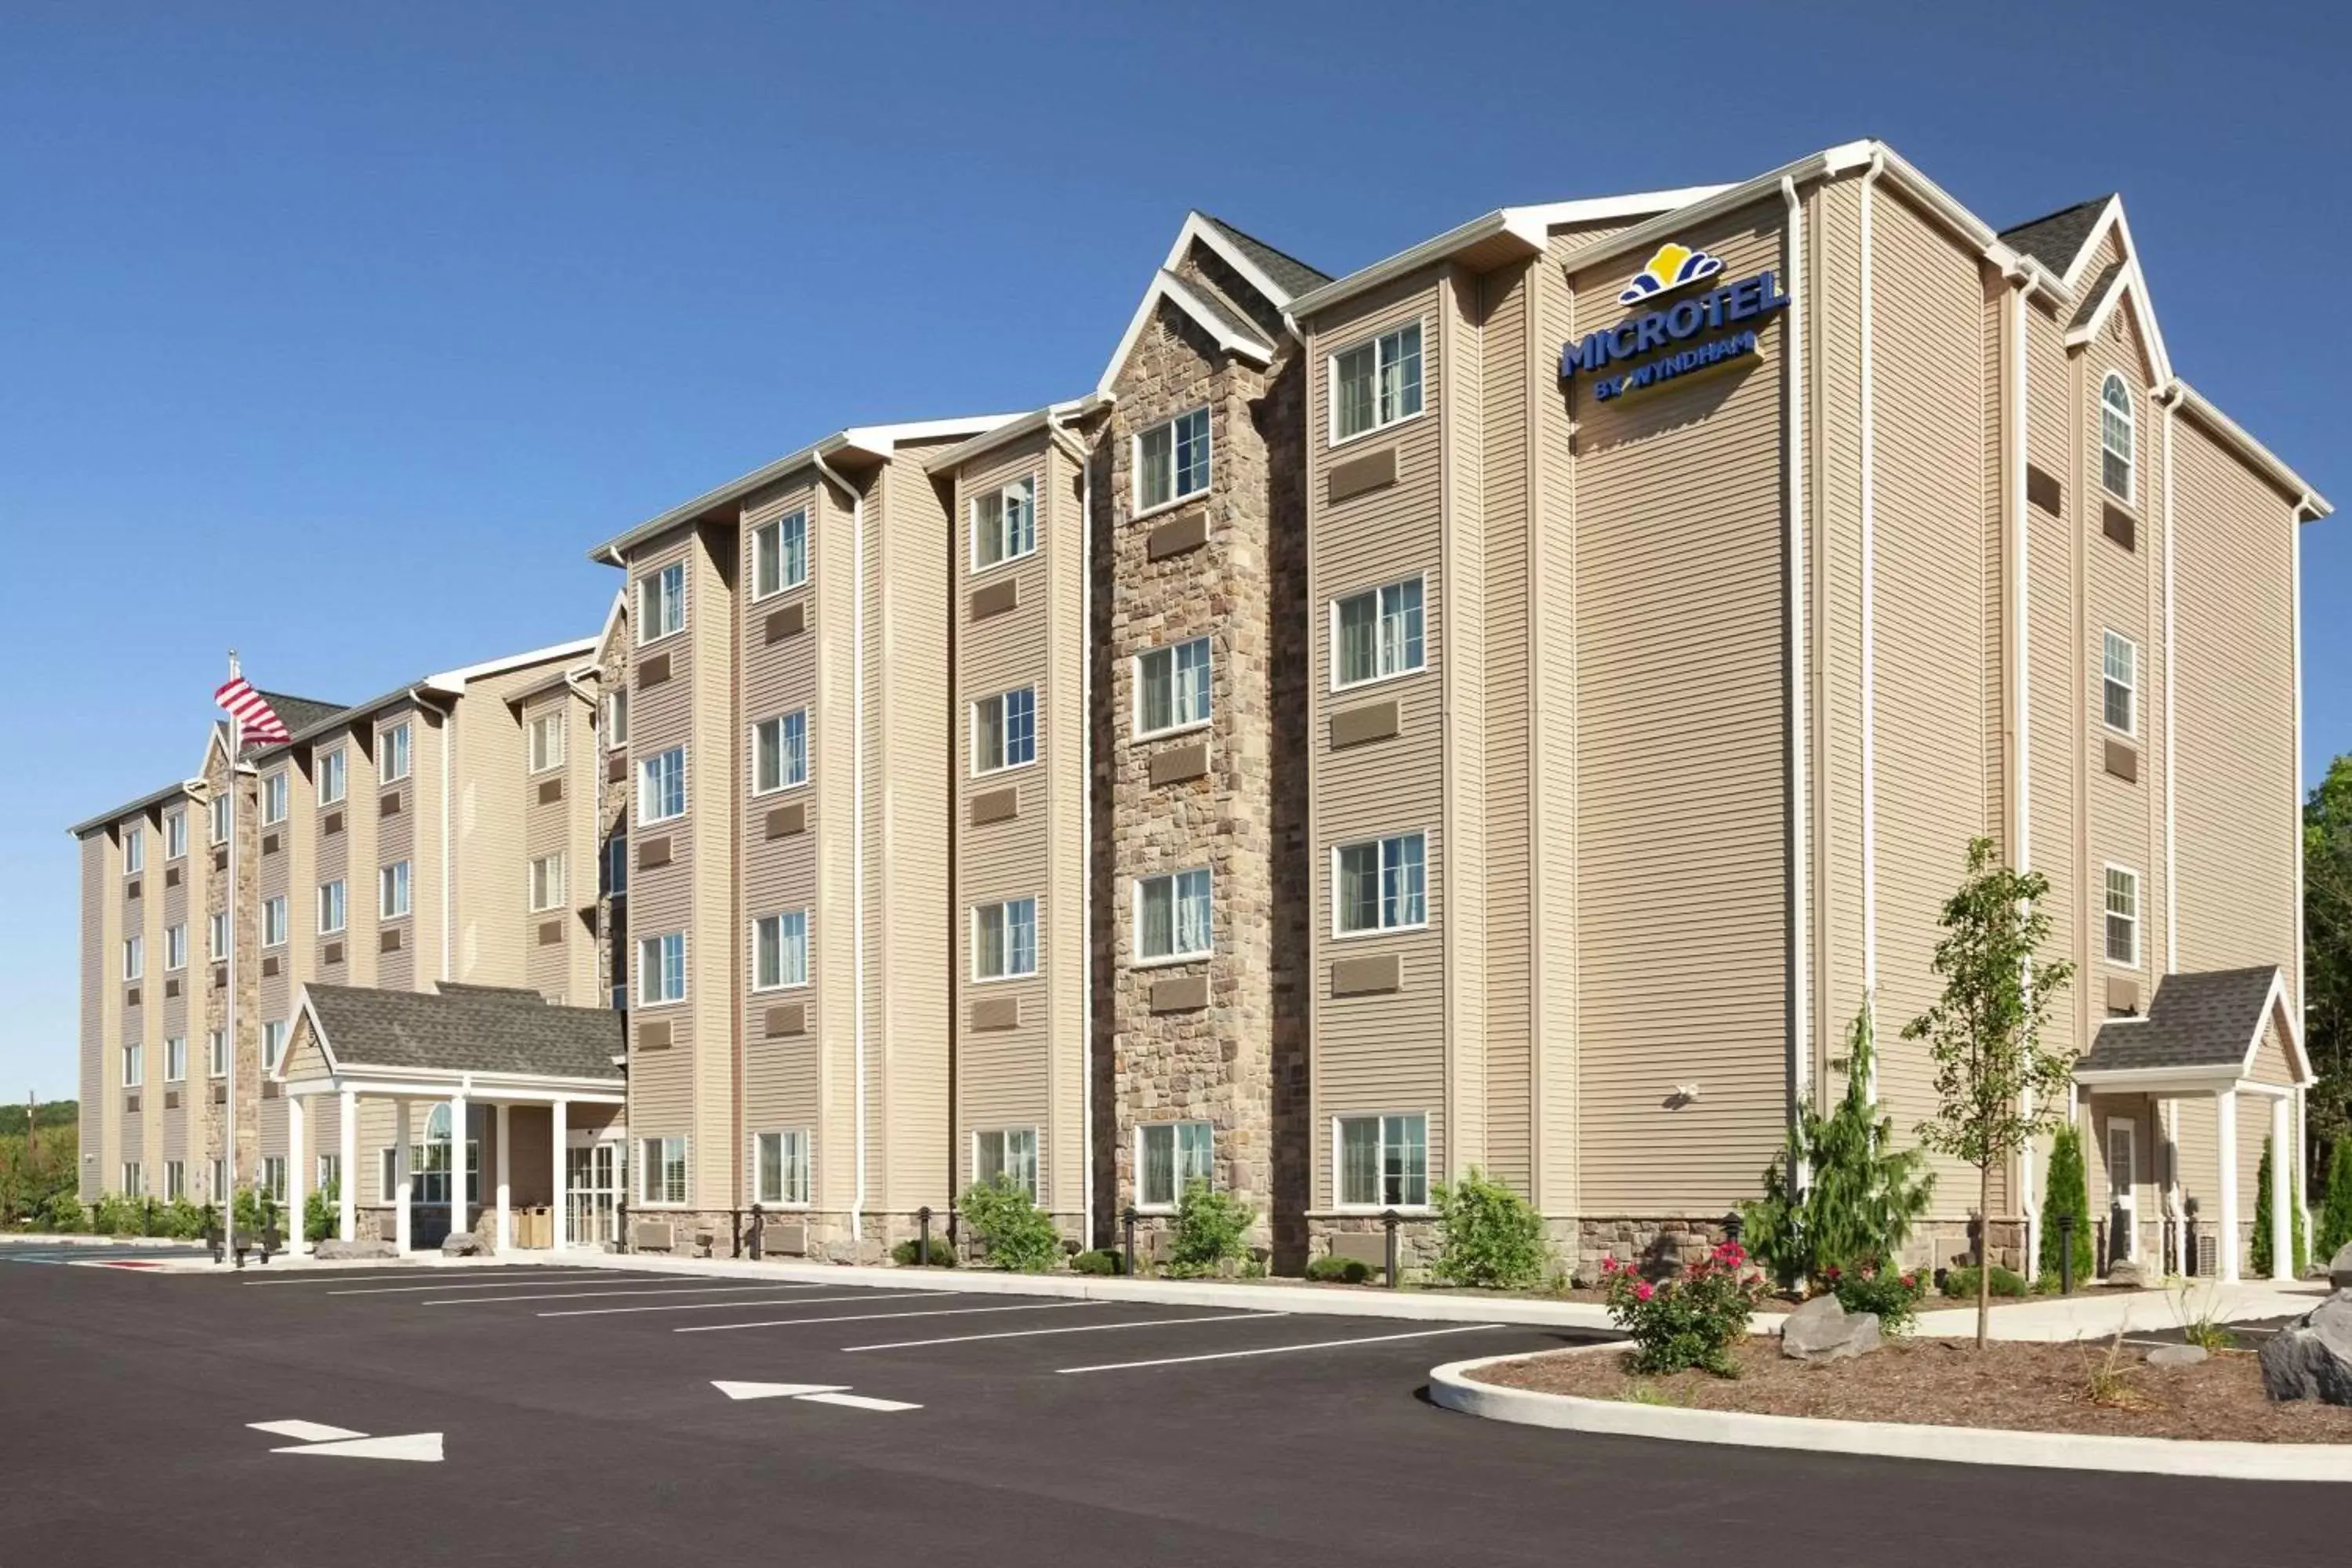 Property Building in Microtel Inn & Suites by Wyndham Wilkes Barre